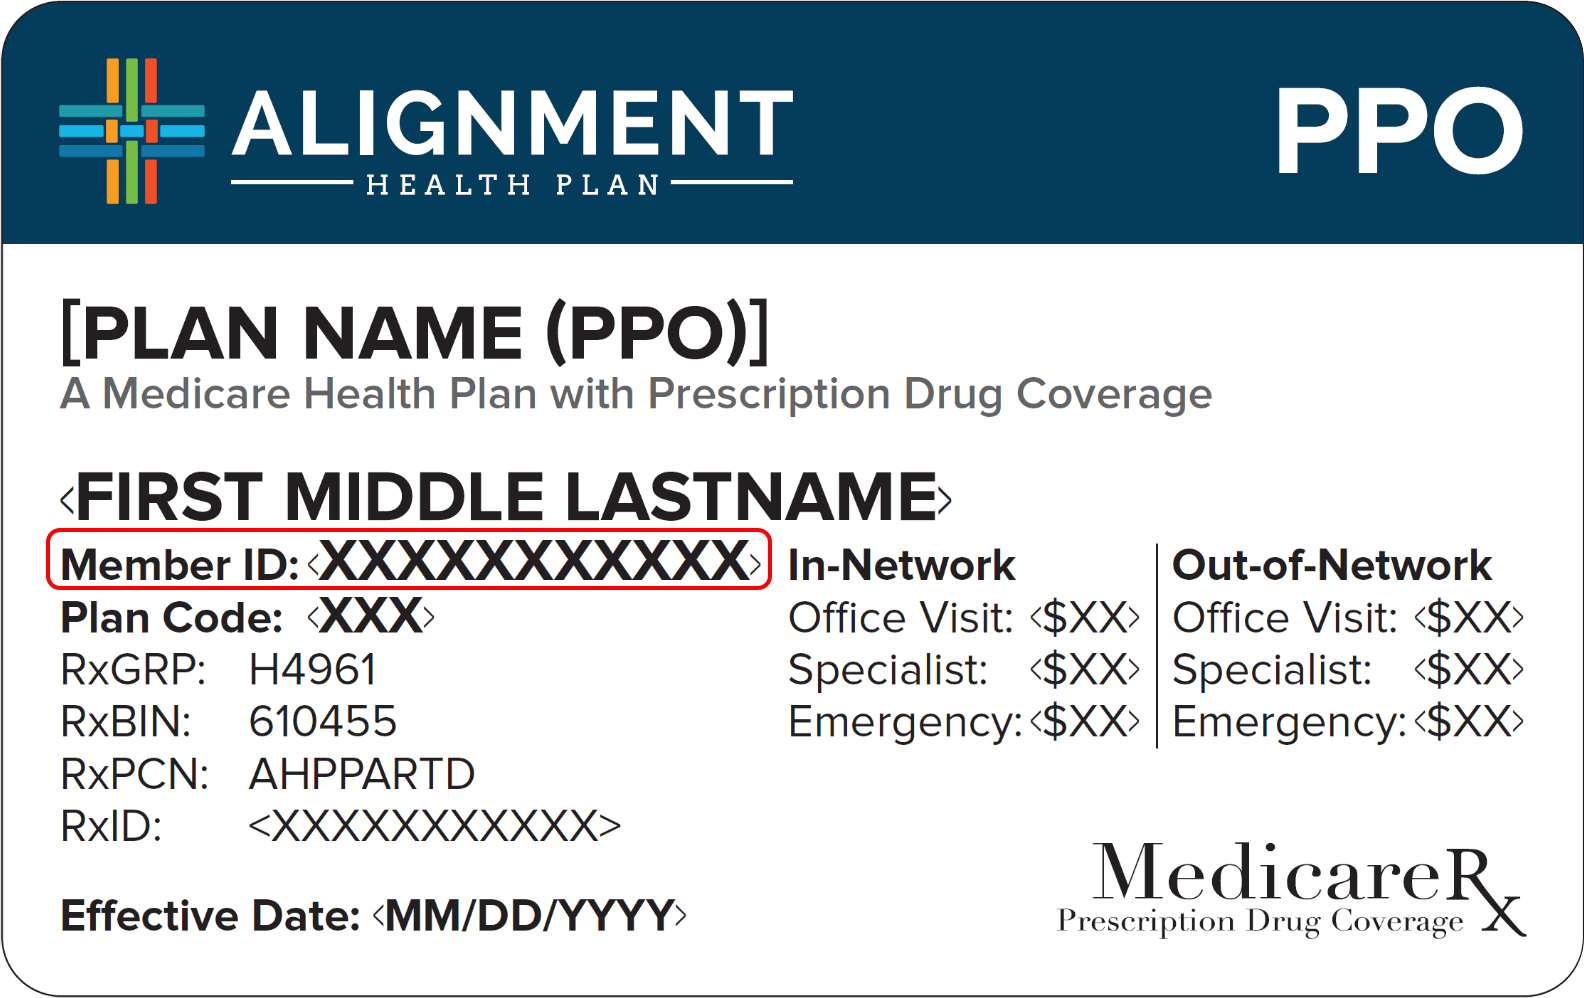 Alignment Health Plan PPO ID Number